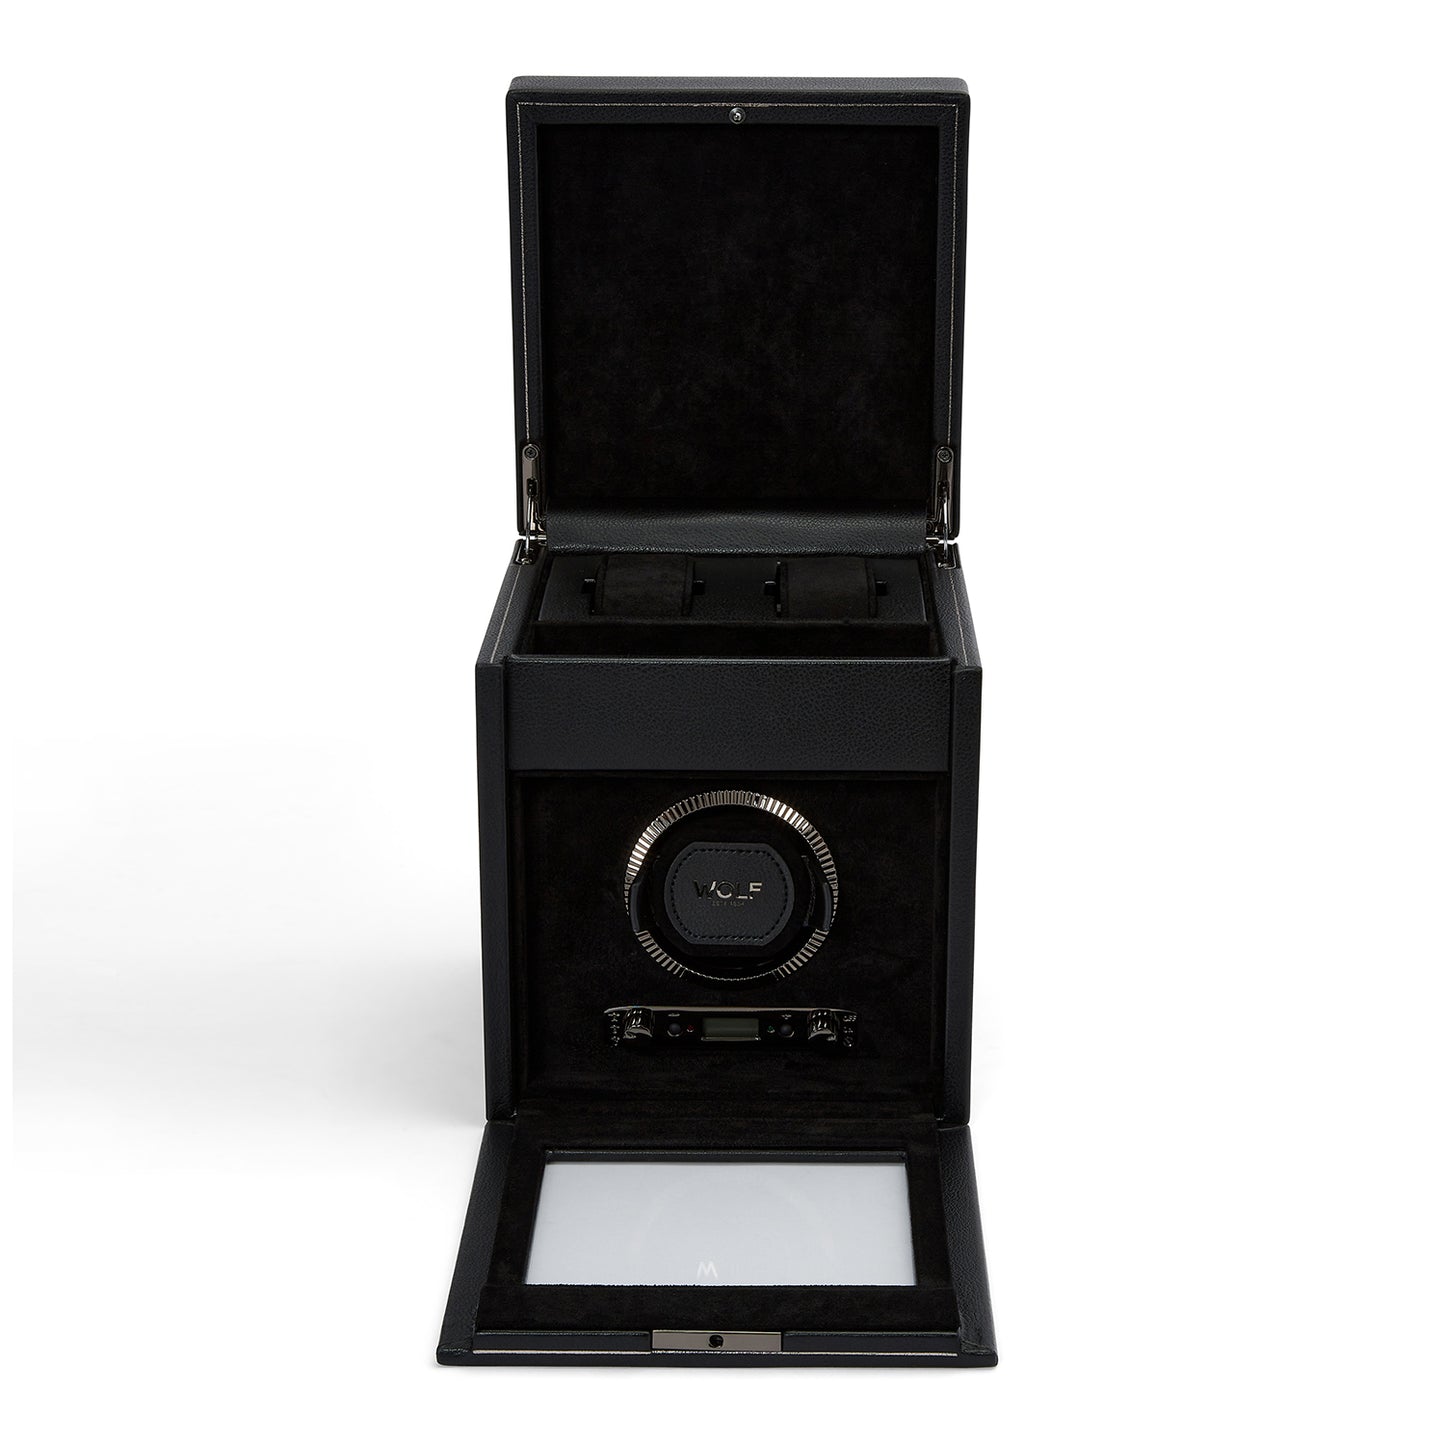 Exquisite British Racing Single Watch Winder by WOLF 1834 - Elegant Automatic Timepiece Maintenance with Storage